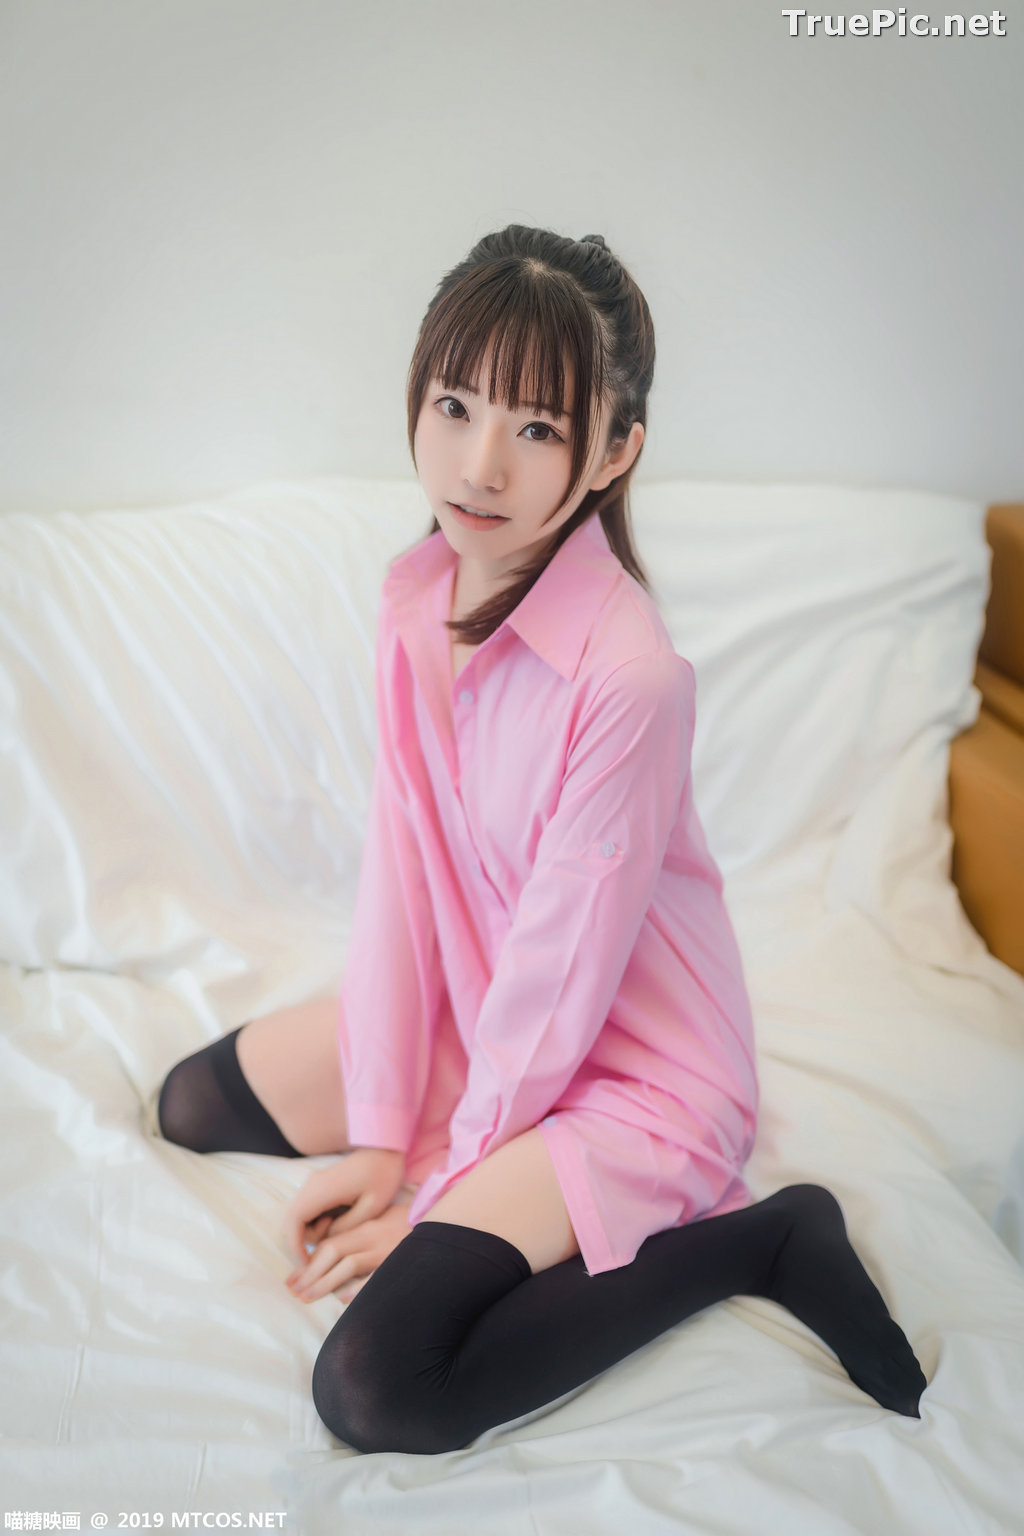 Image [MTCos] 喵糖映画 Vol.022 – Chinese Model – Pink Shirt and Black Stockings - TruePic.net - Picture-11